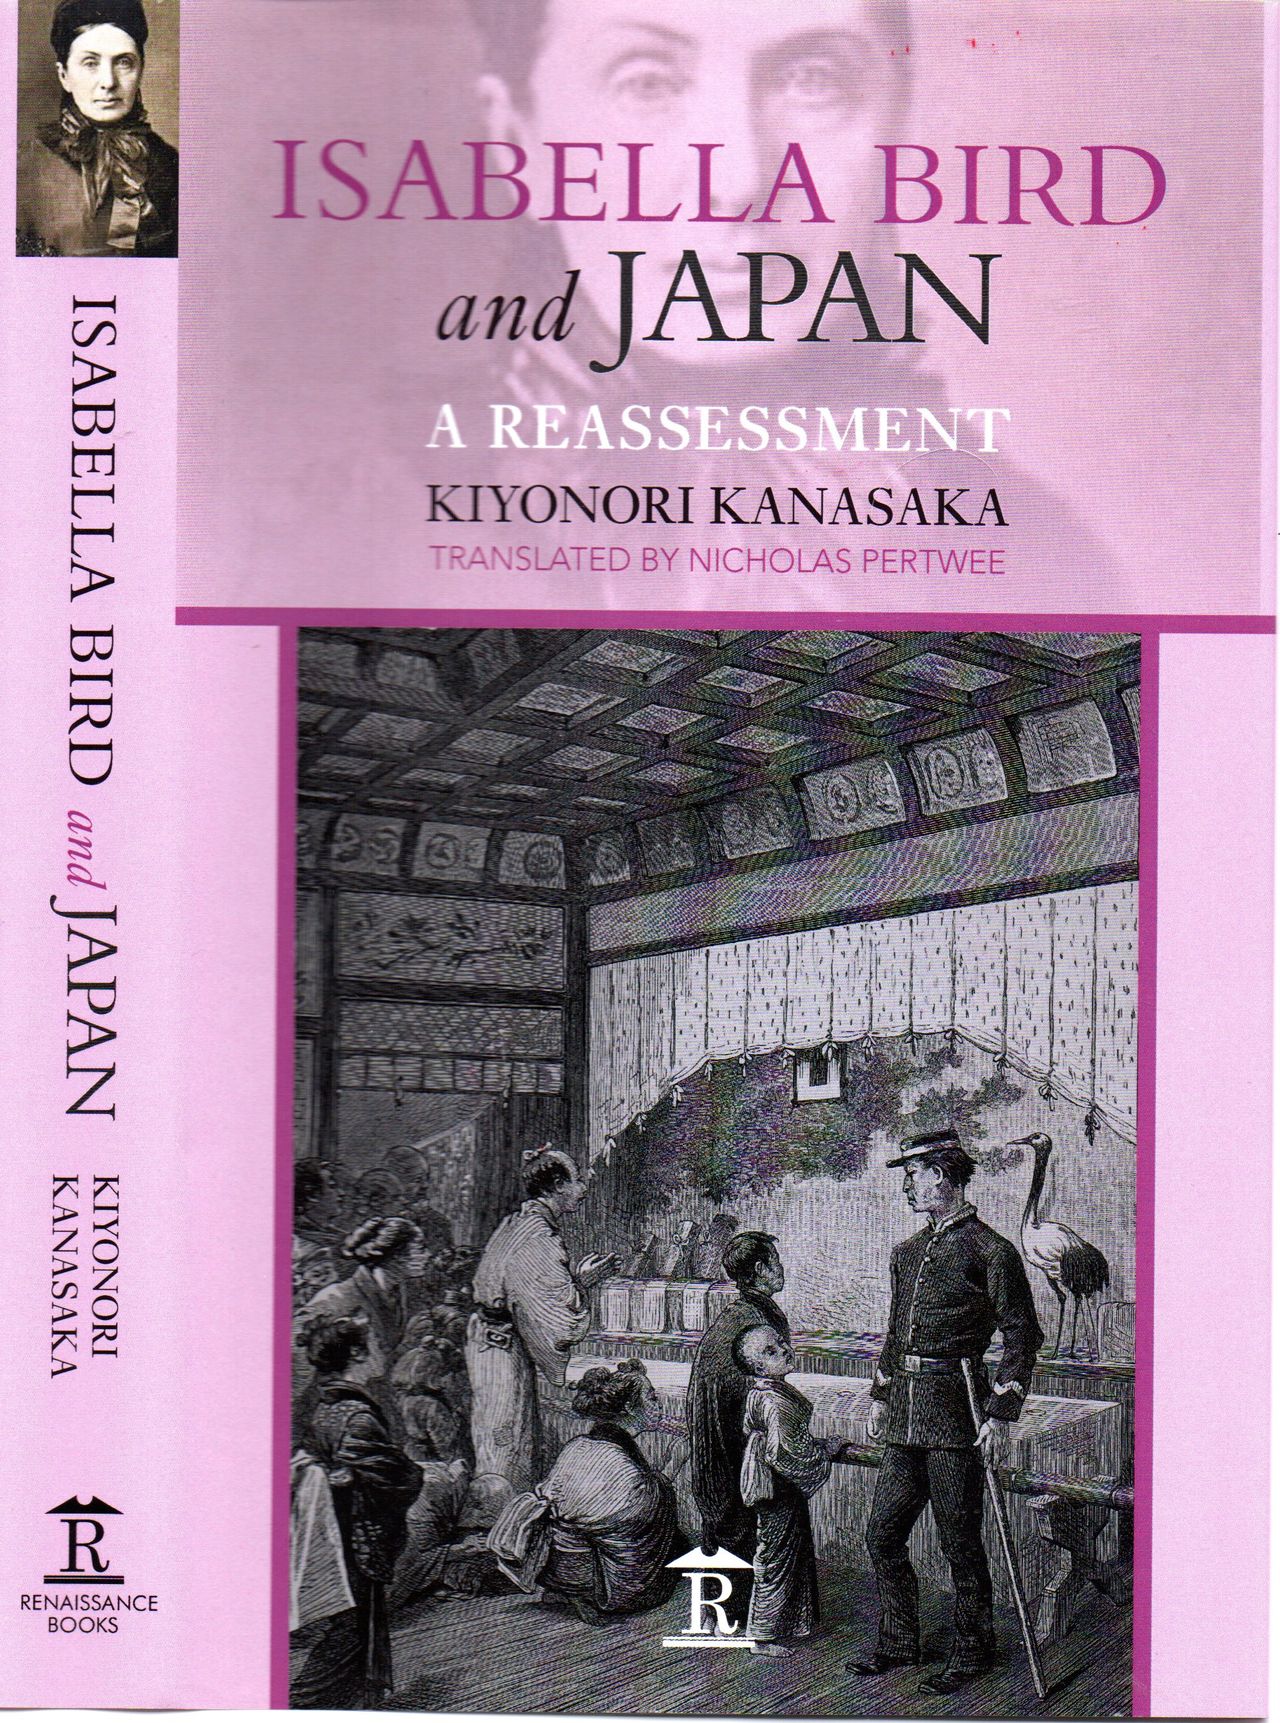 Isabellae Bird and Japan: A Reassessment